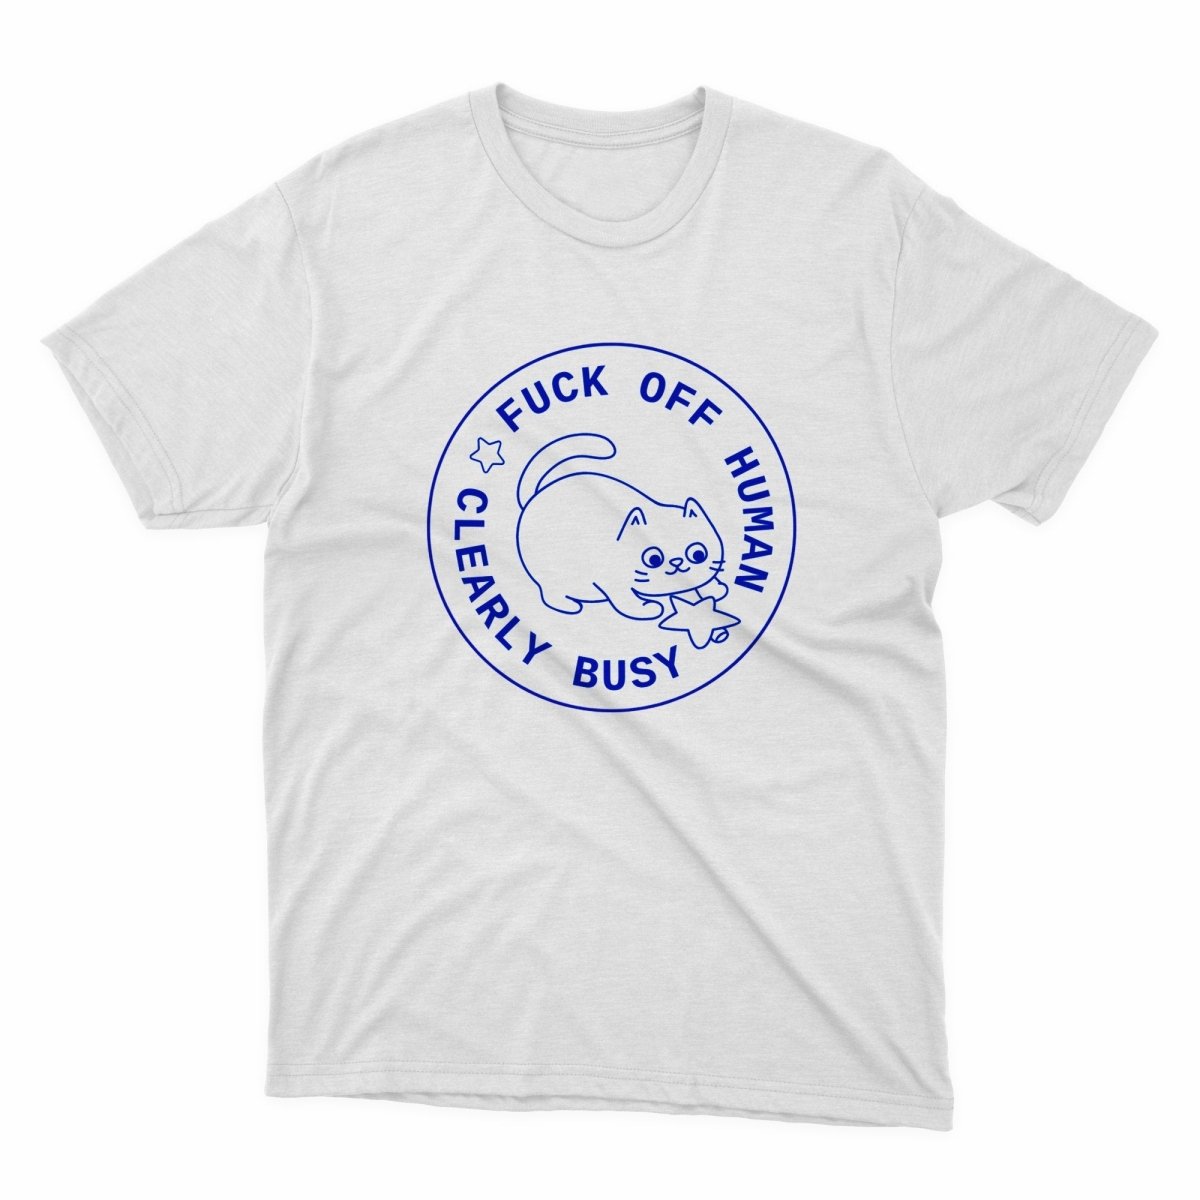 Fuck Off Human Clearly Busy Cat Shirt - stickerbullFuck Off Human Clearly Busy Cat ShirtShirtsPrintifystickerbull10131996965445862885WhiteSa white t - shirt with a blue and white logo